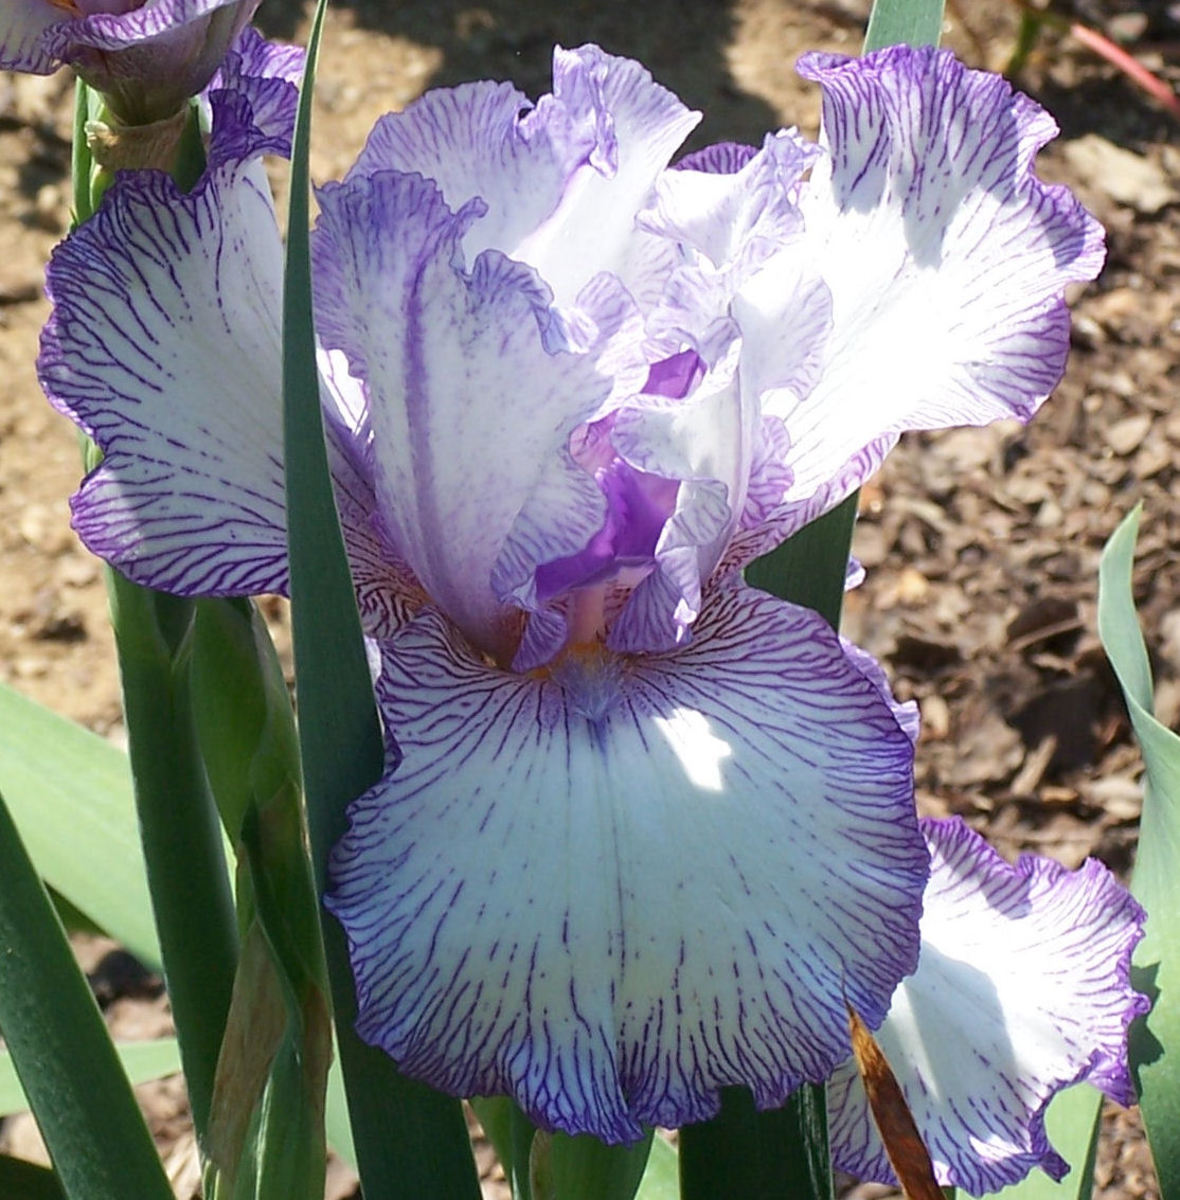 This is one of the few re-blooming irises I had before moving and leaving them behind